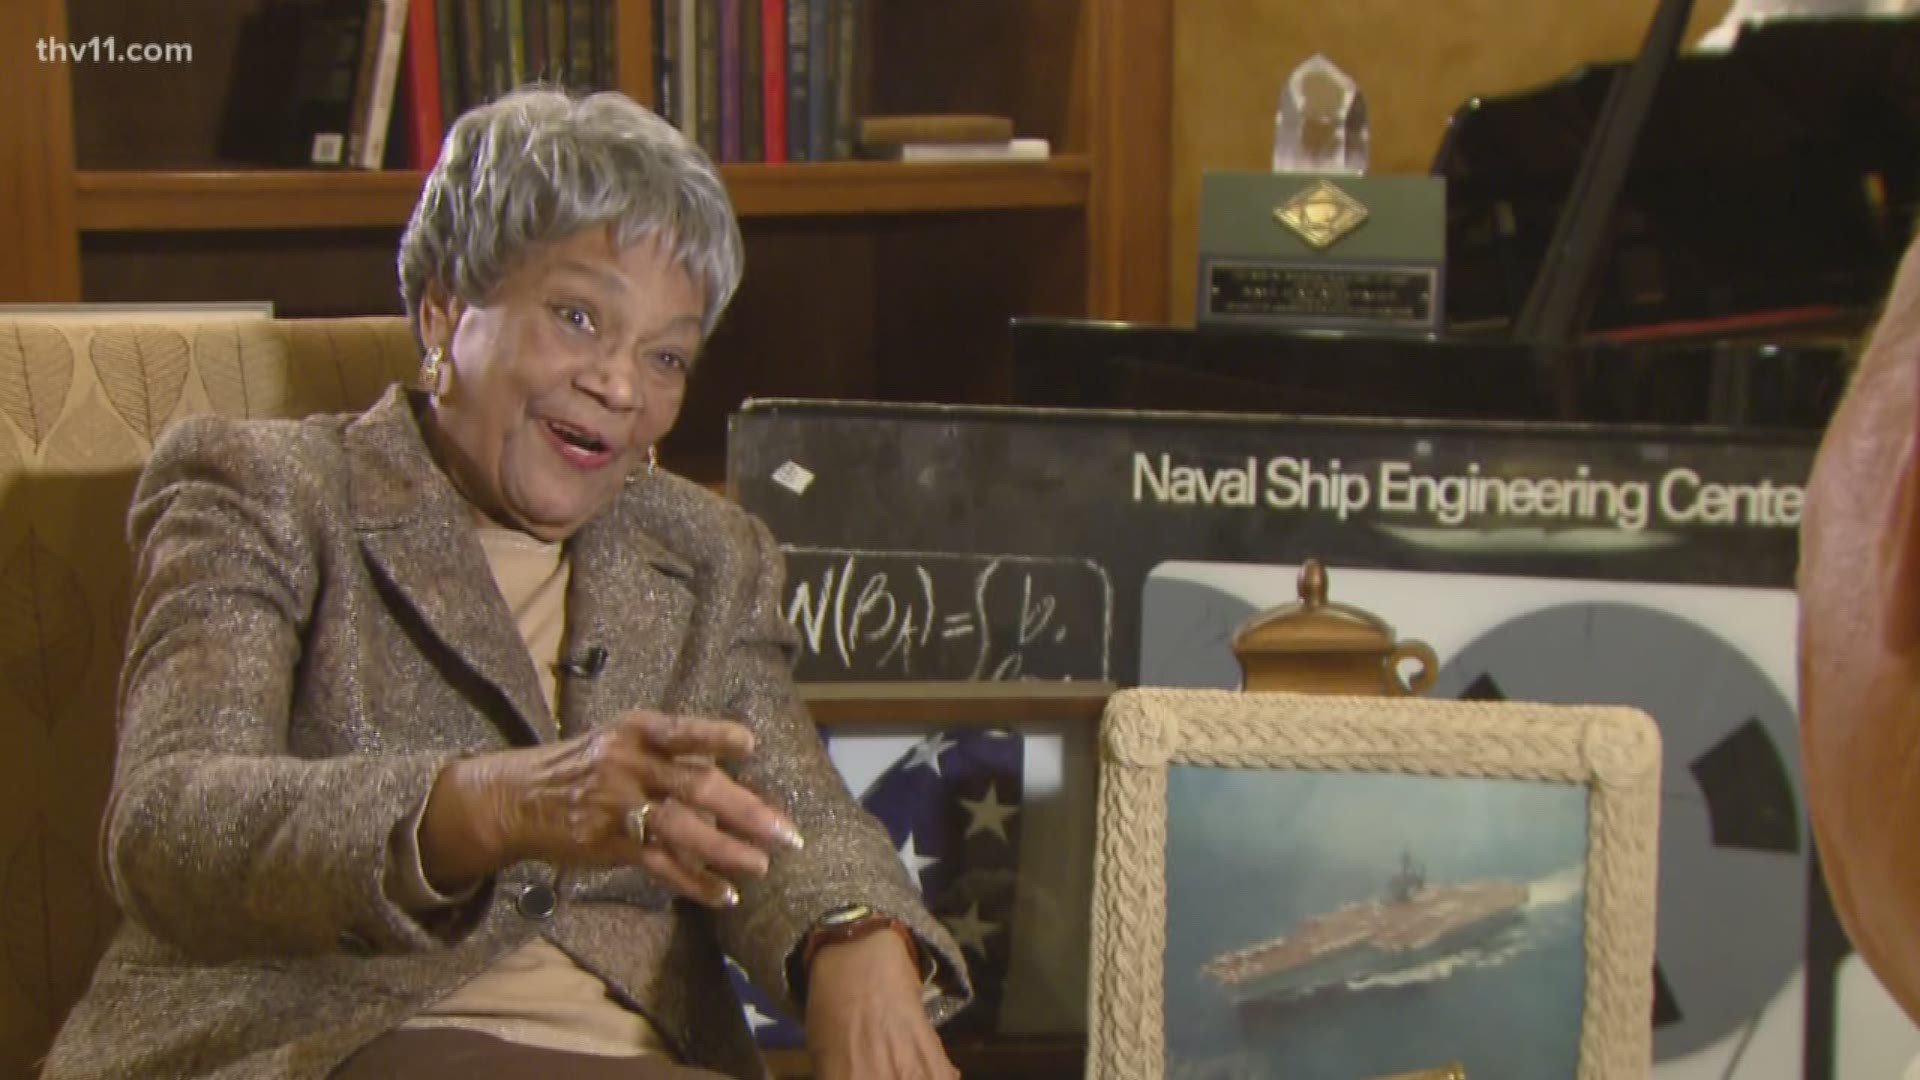 Raye Montague, known as Arkansas's own "Hidden Figure," has passed away.